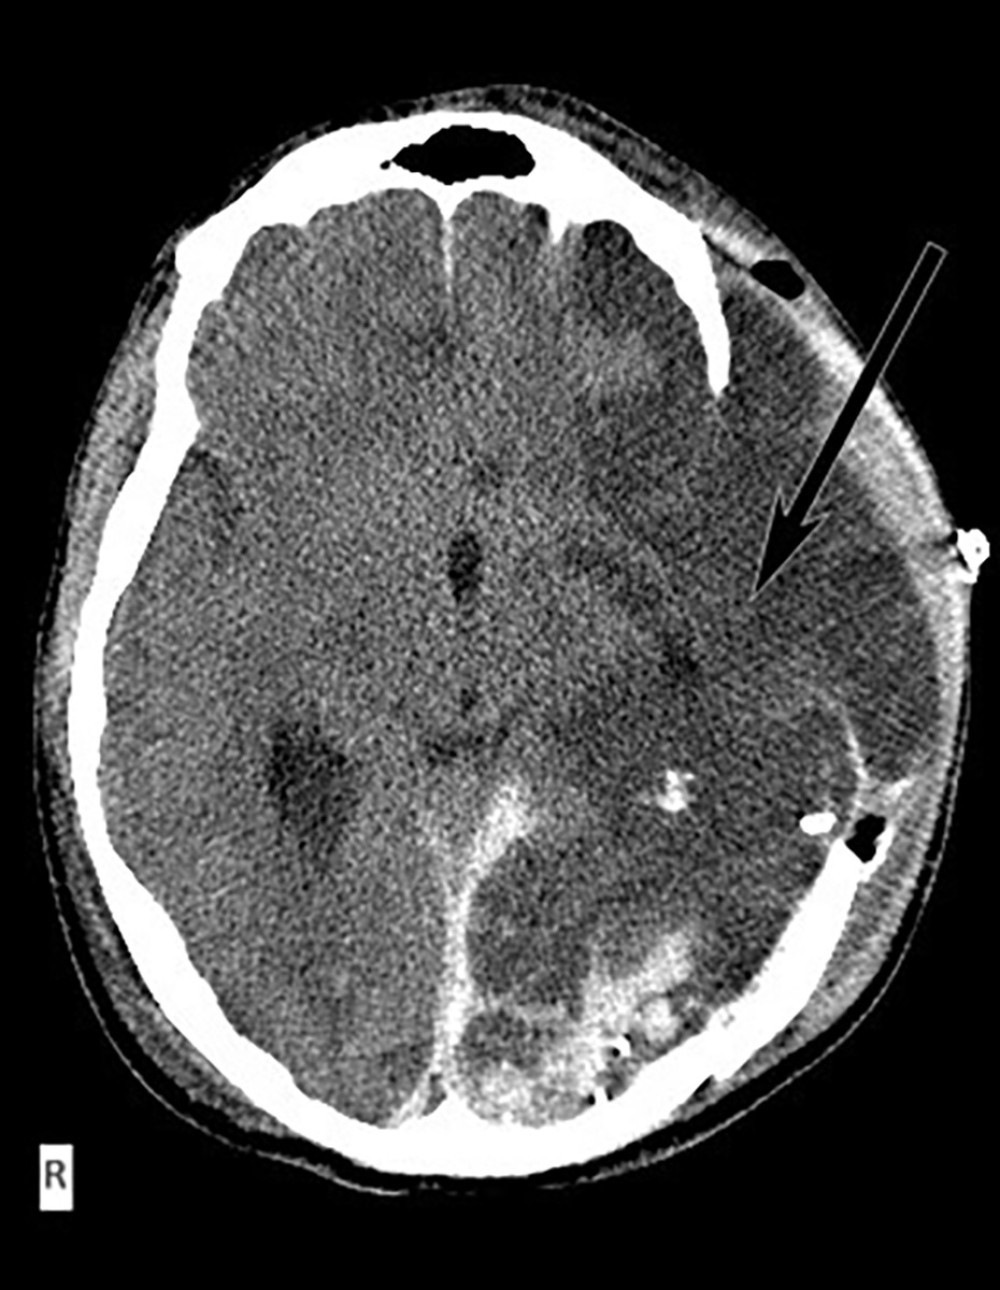 Postoperative axial computed tomography scan. Postoperative findings after left decompressive craniectomy, extensive cerebral edema of the left hemisphere (pointed with arrow). At the occipital lobe, we can recognize traumatic subarachnoid hemorrhage, contusions, and osseus fragments and parafalcine subdural hematoma on the occipital part of the falx cerebri.